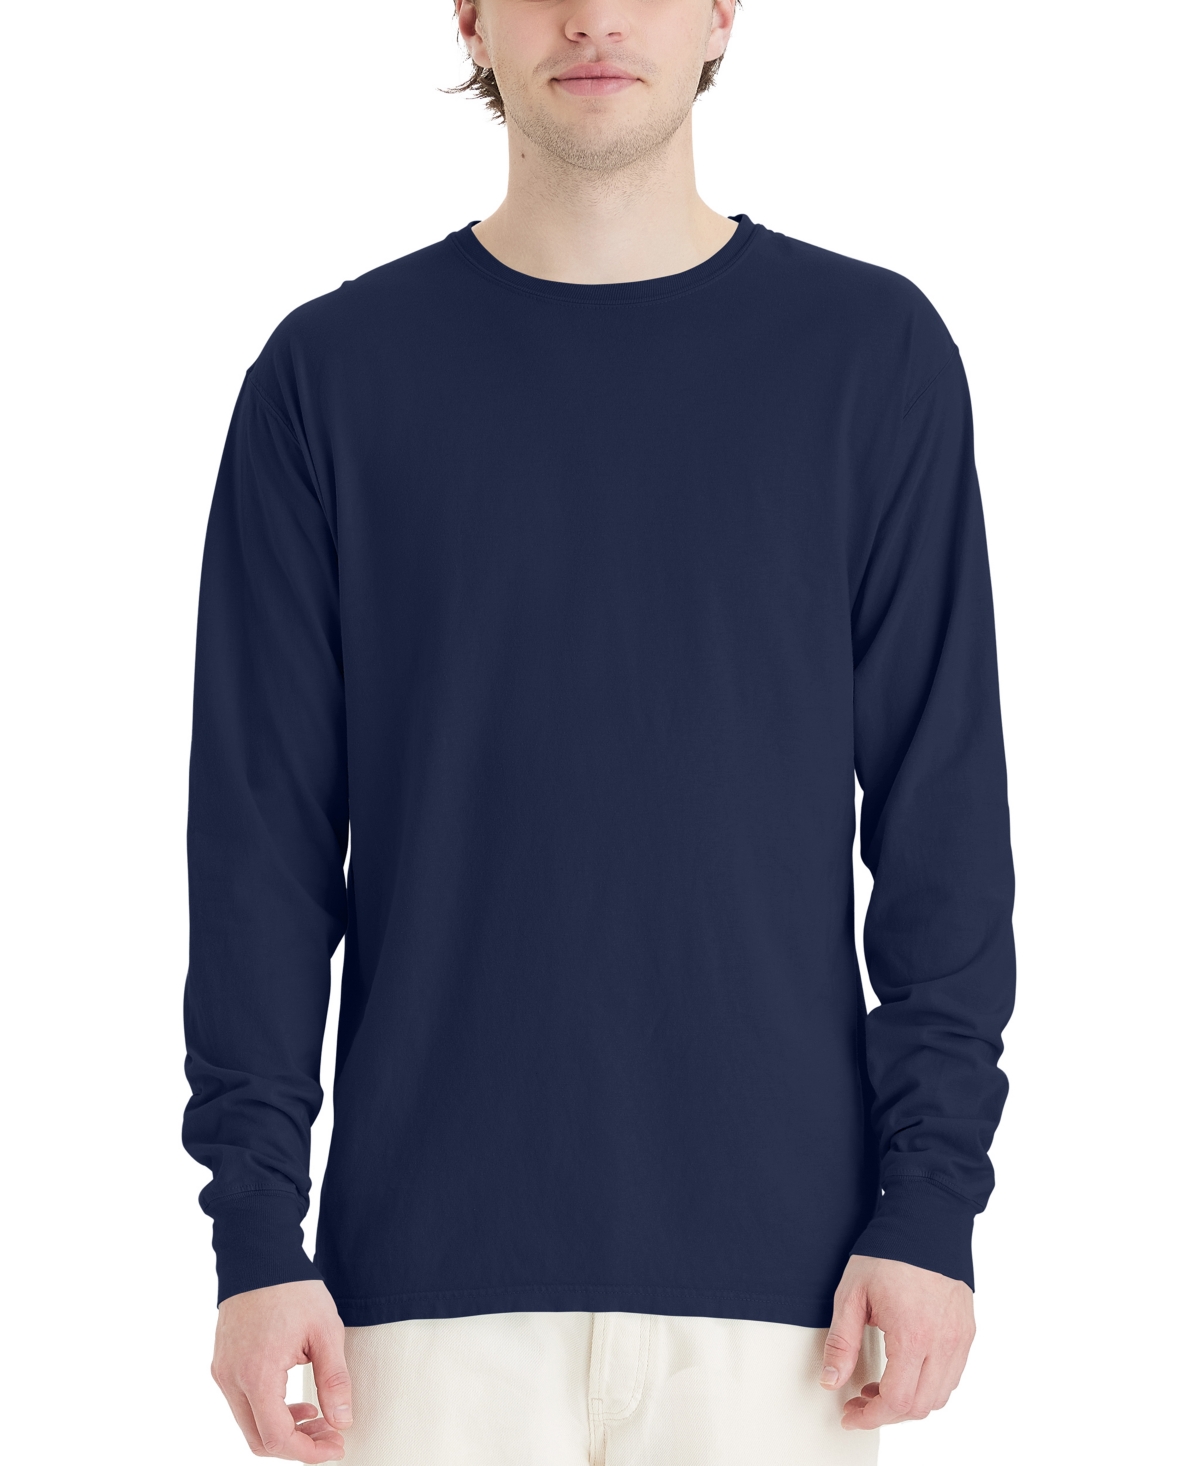 Hanes Unisex Garment Dyed Long Sleeve Cotton T-shirt In Blue